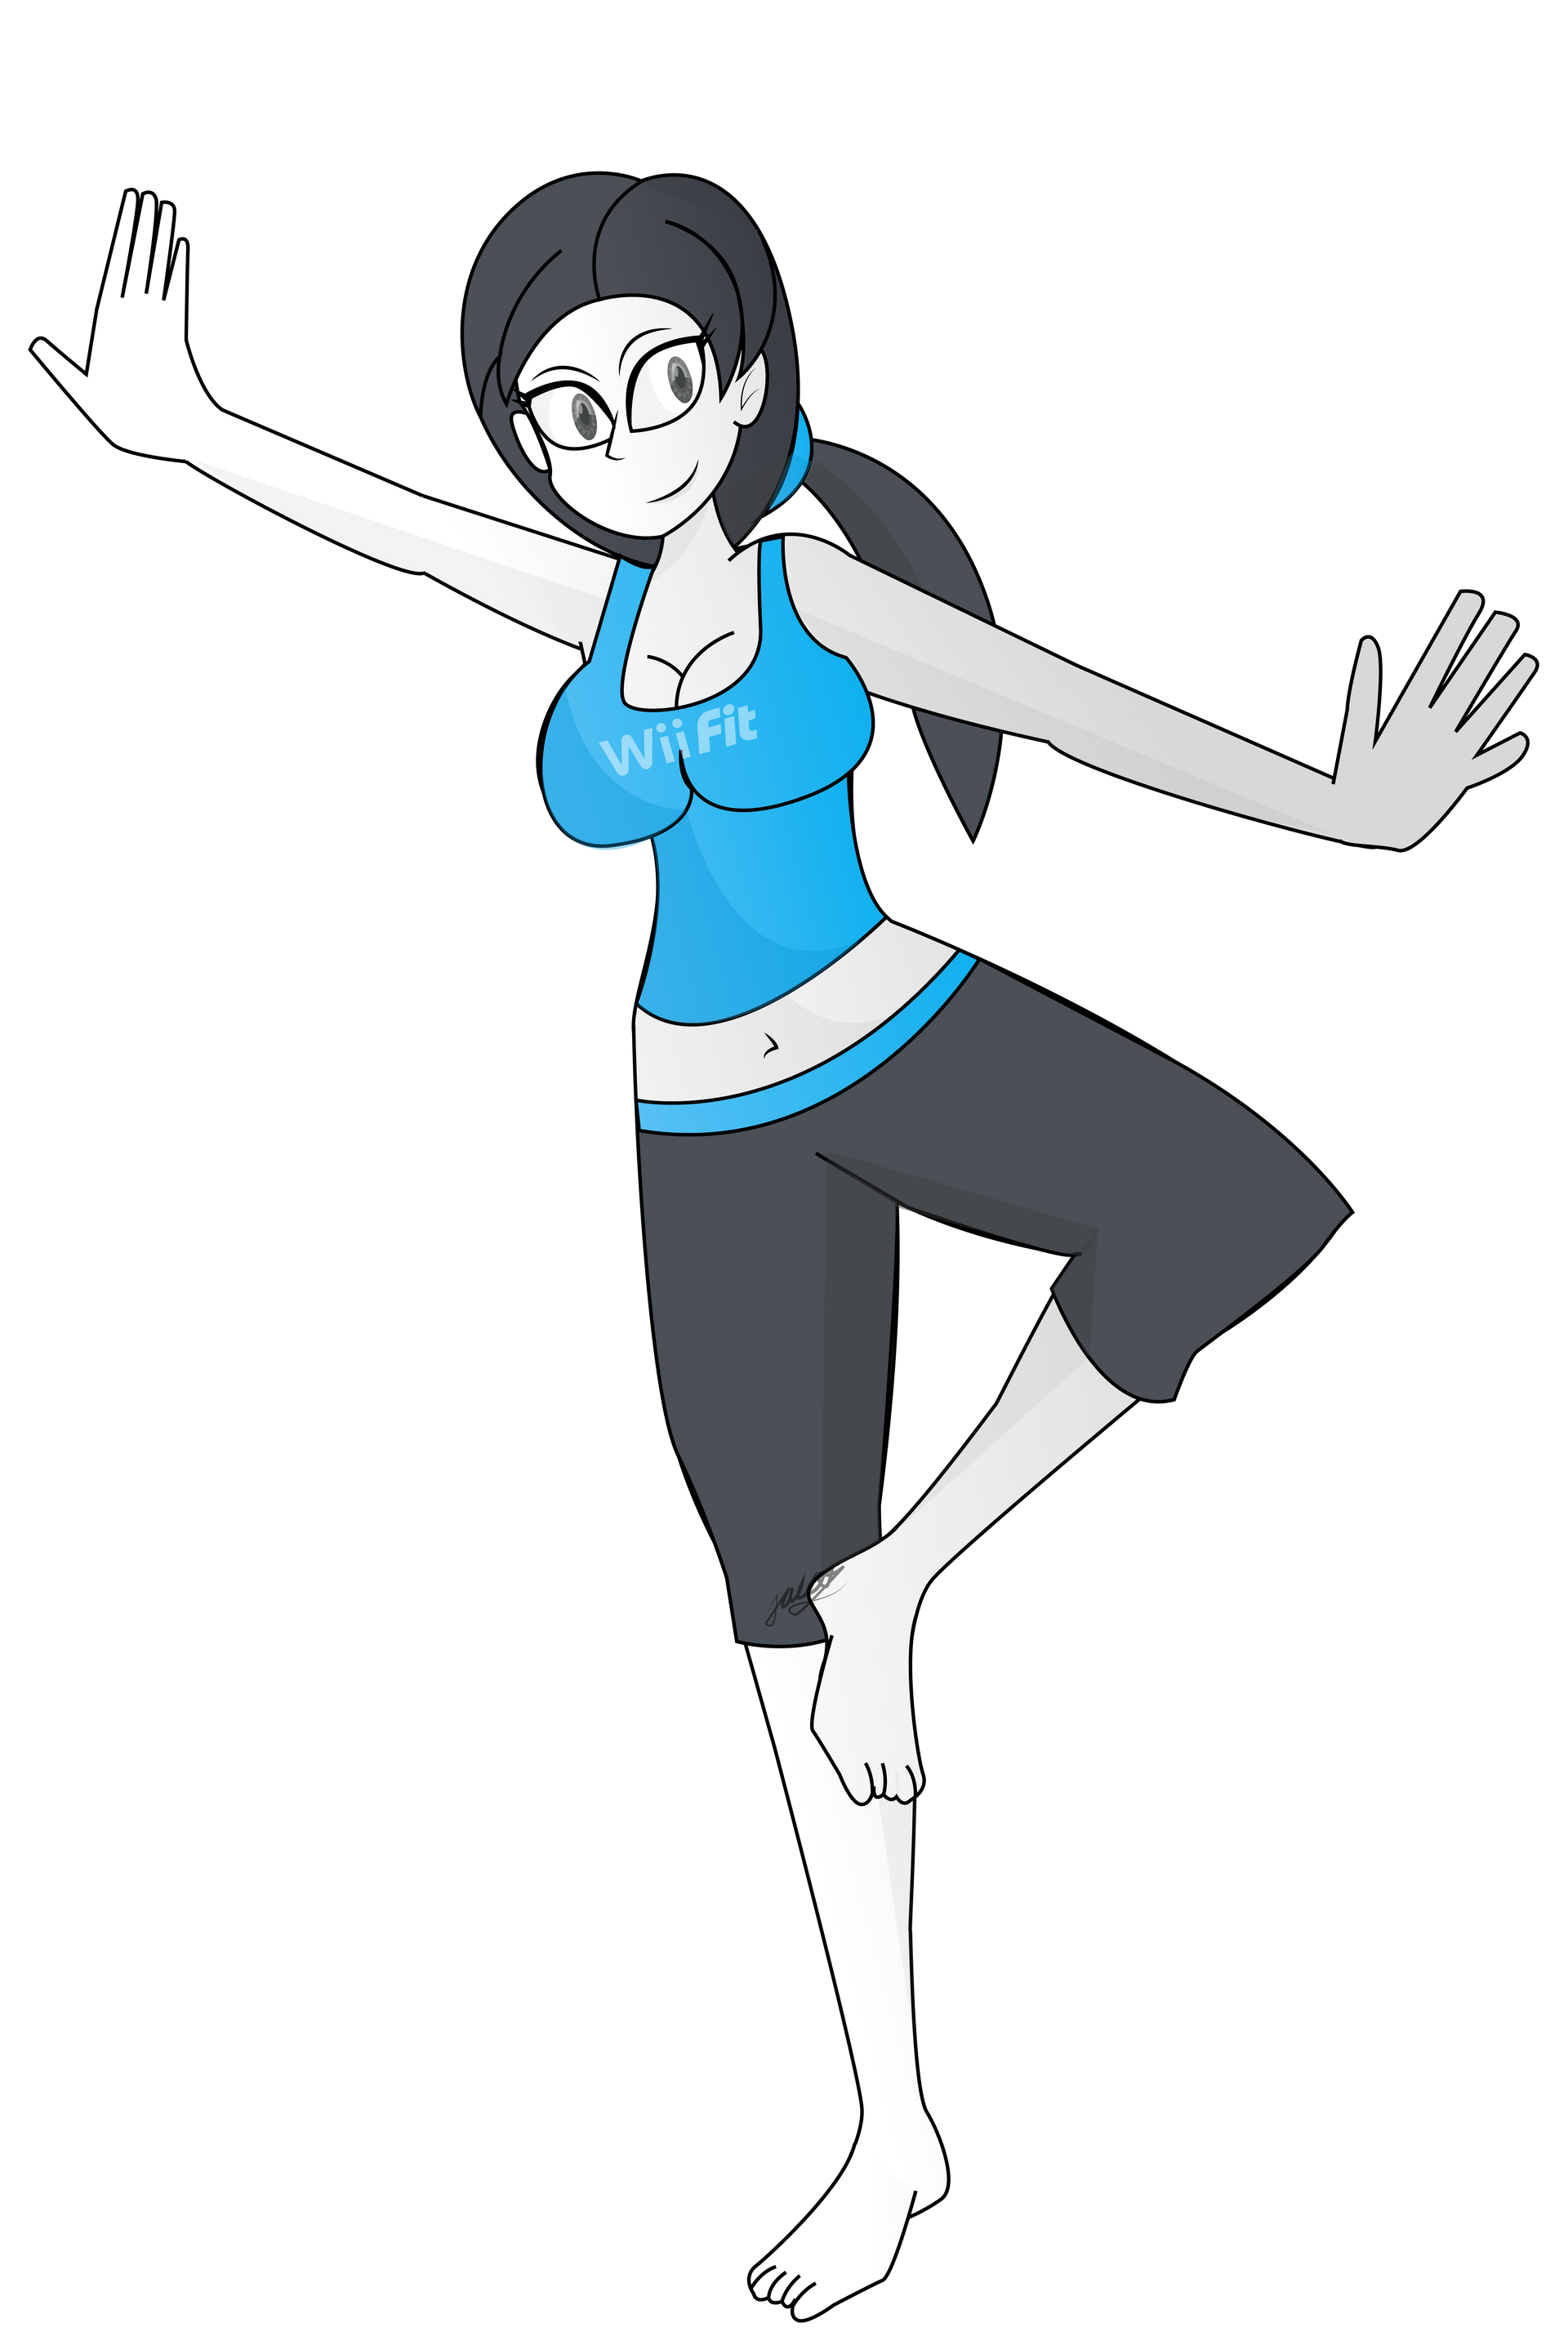 Wii Fit Trainer By Jav Toons On Deviantart 